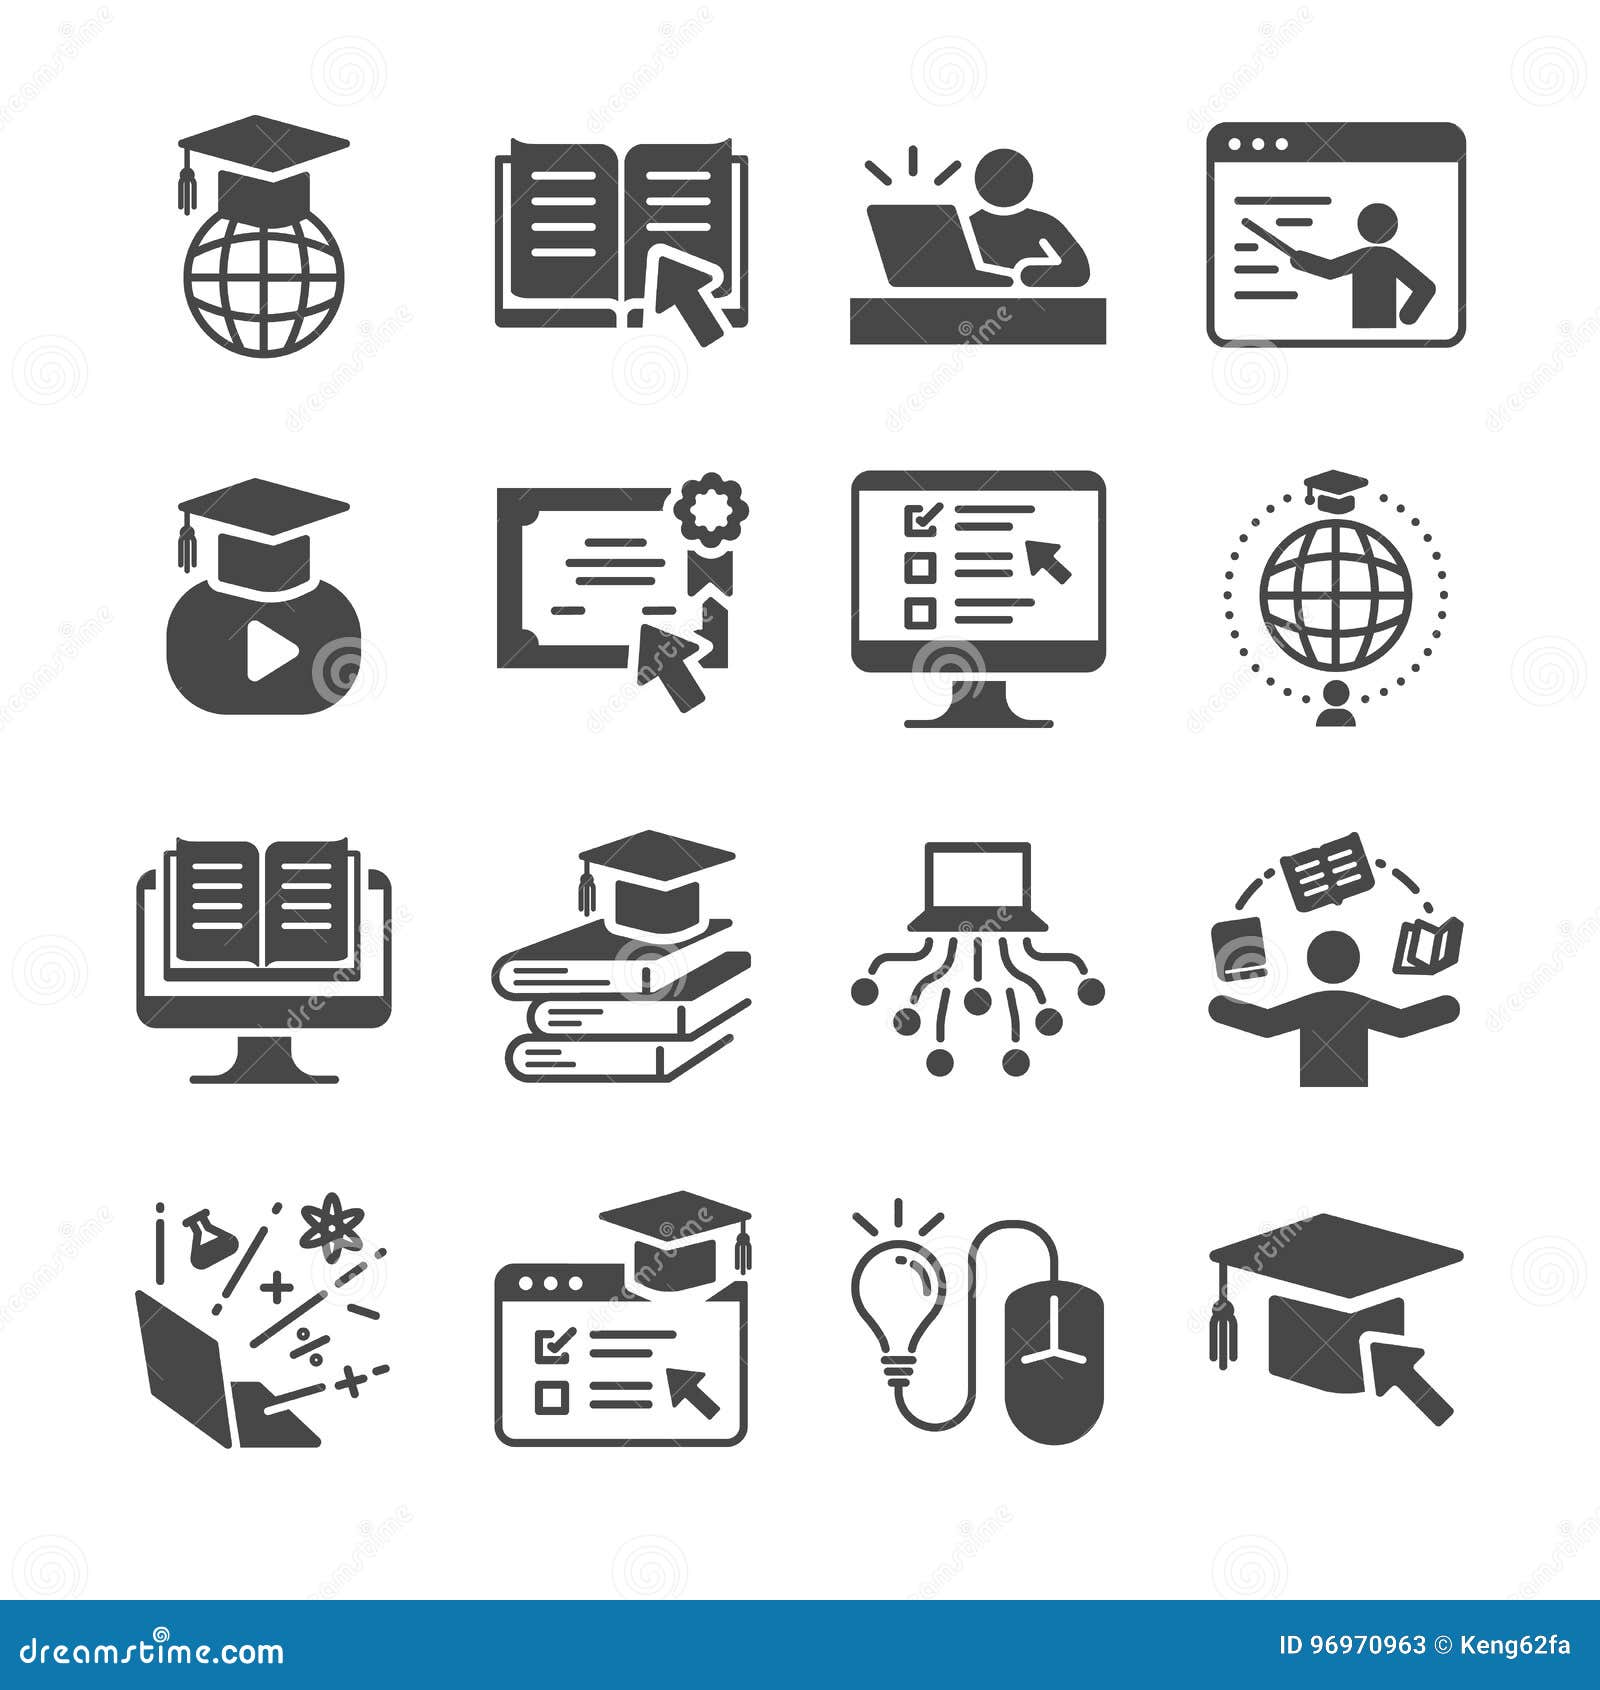 online education icon set. included the icons as graduated, books, student, course, school and more